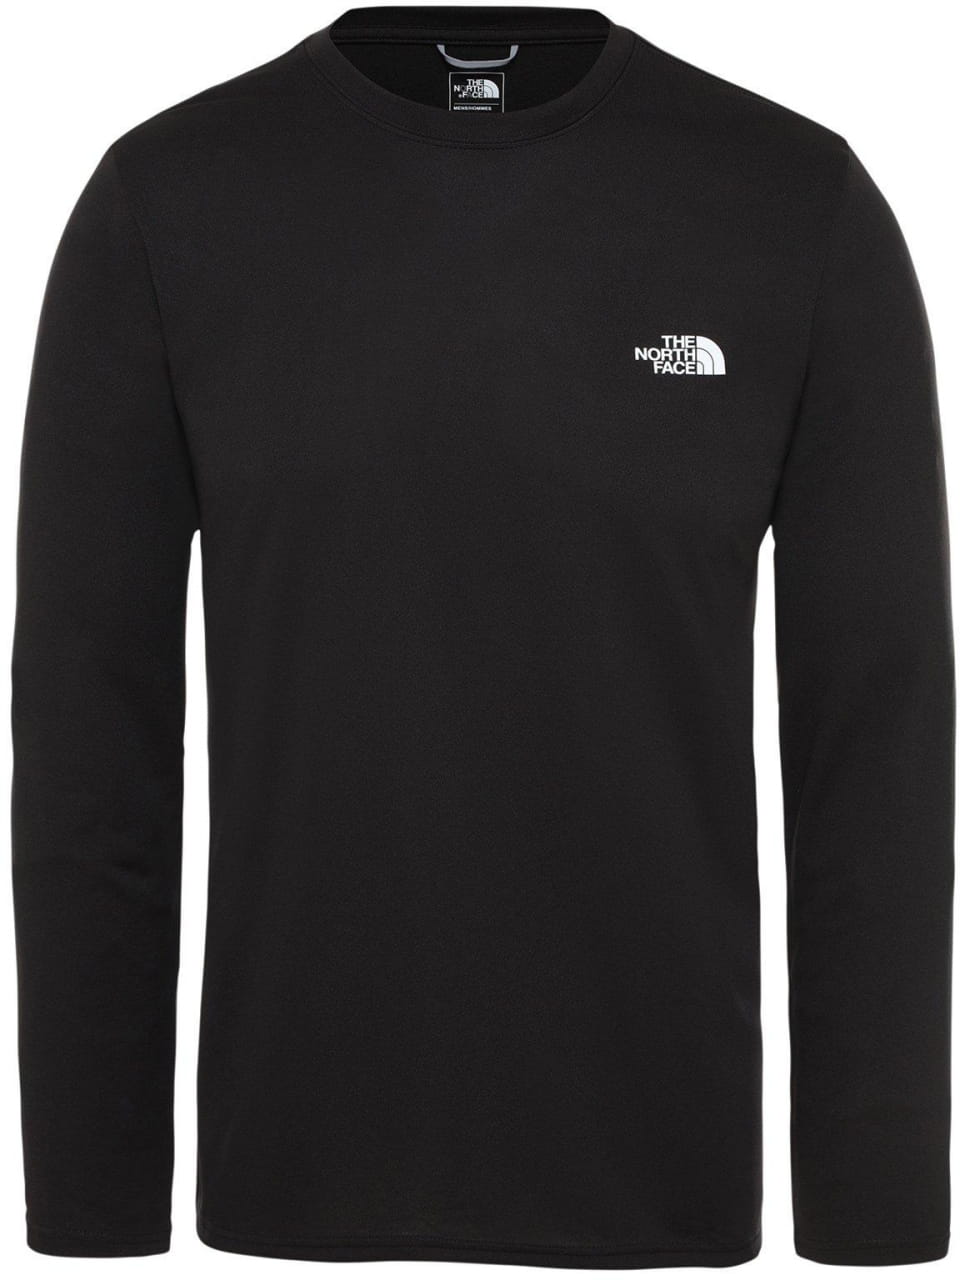 T-Shirts The North Face Men’s Reaxion Amp Long-Sleeve Crew